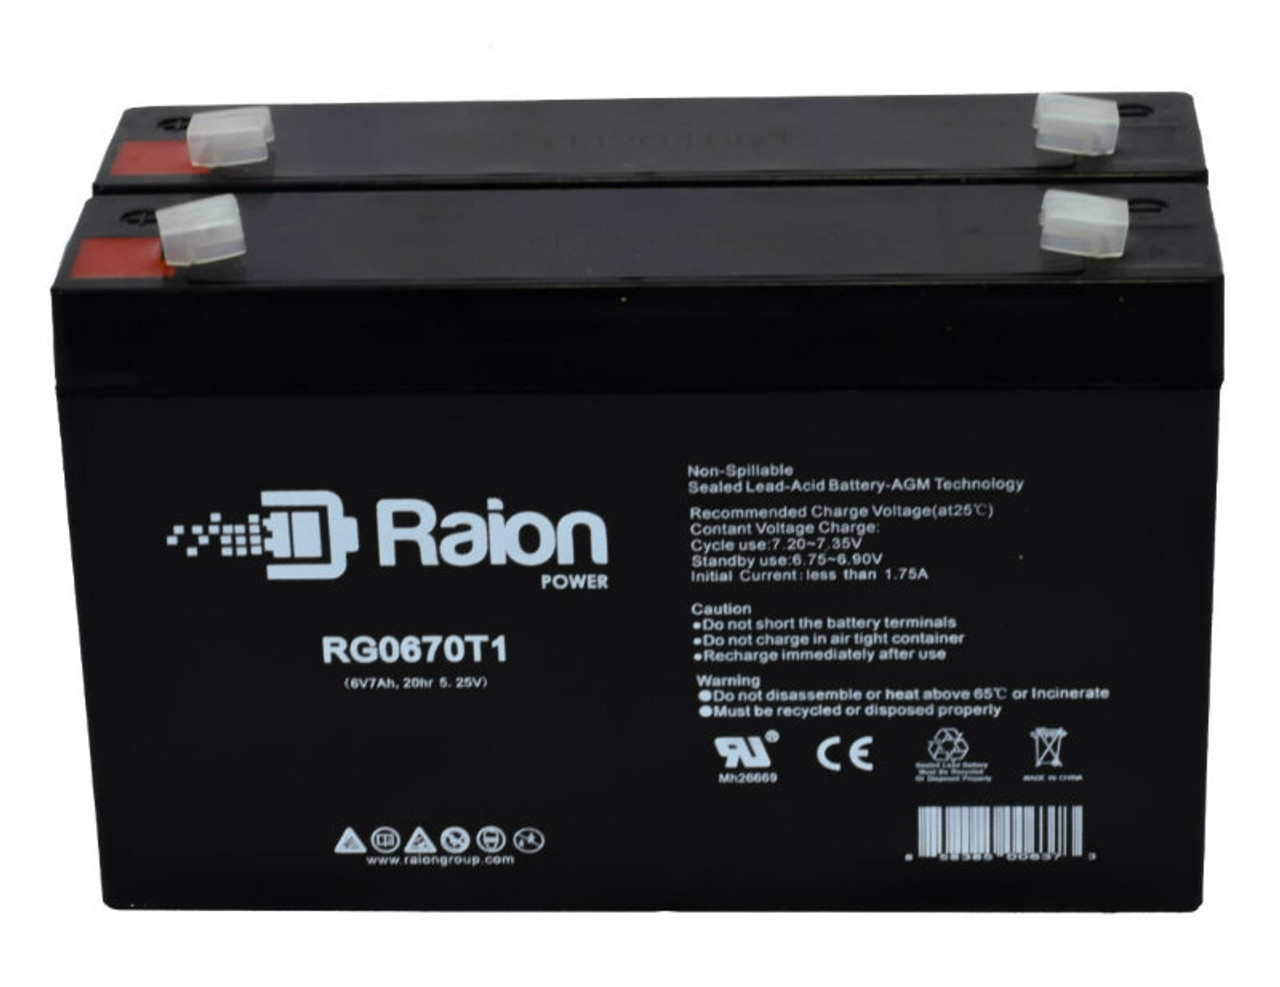 Raion Power RG0670T1 6V 7Ah Replacement Emergency Light Battery for Dual-Lite LM16I - 2 Pack